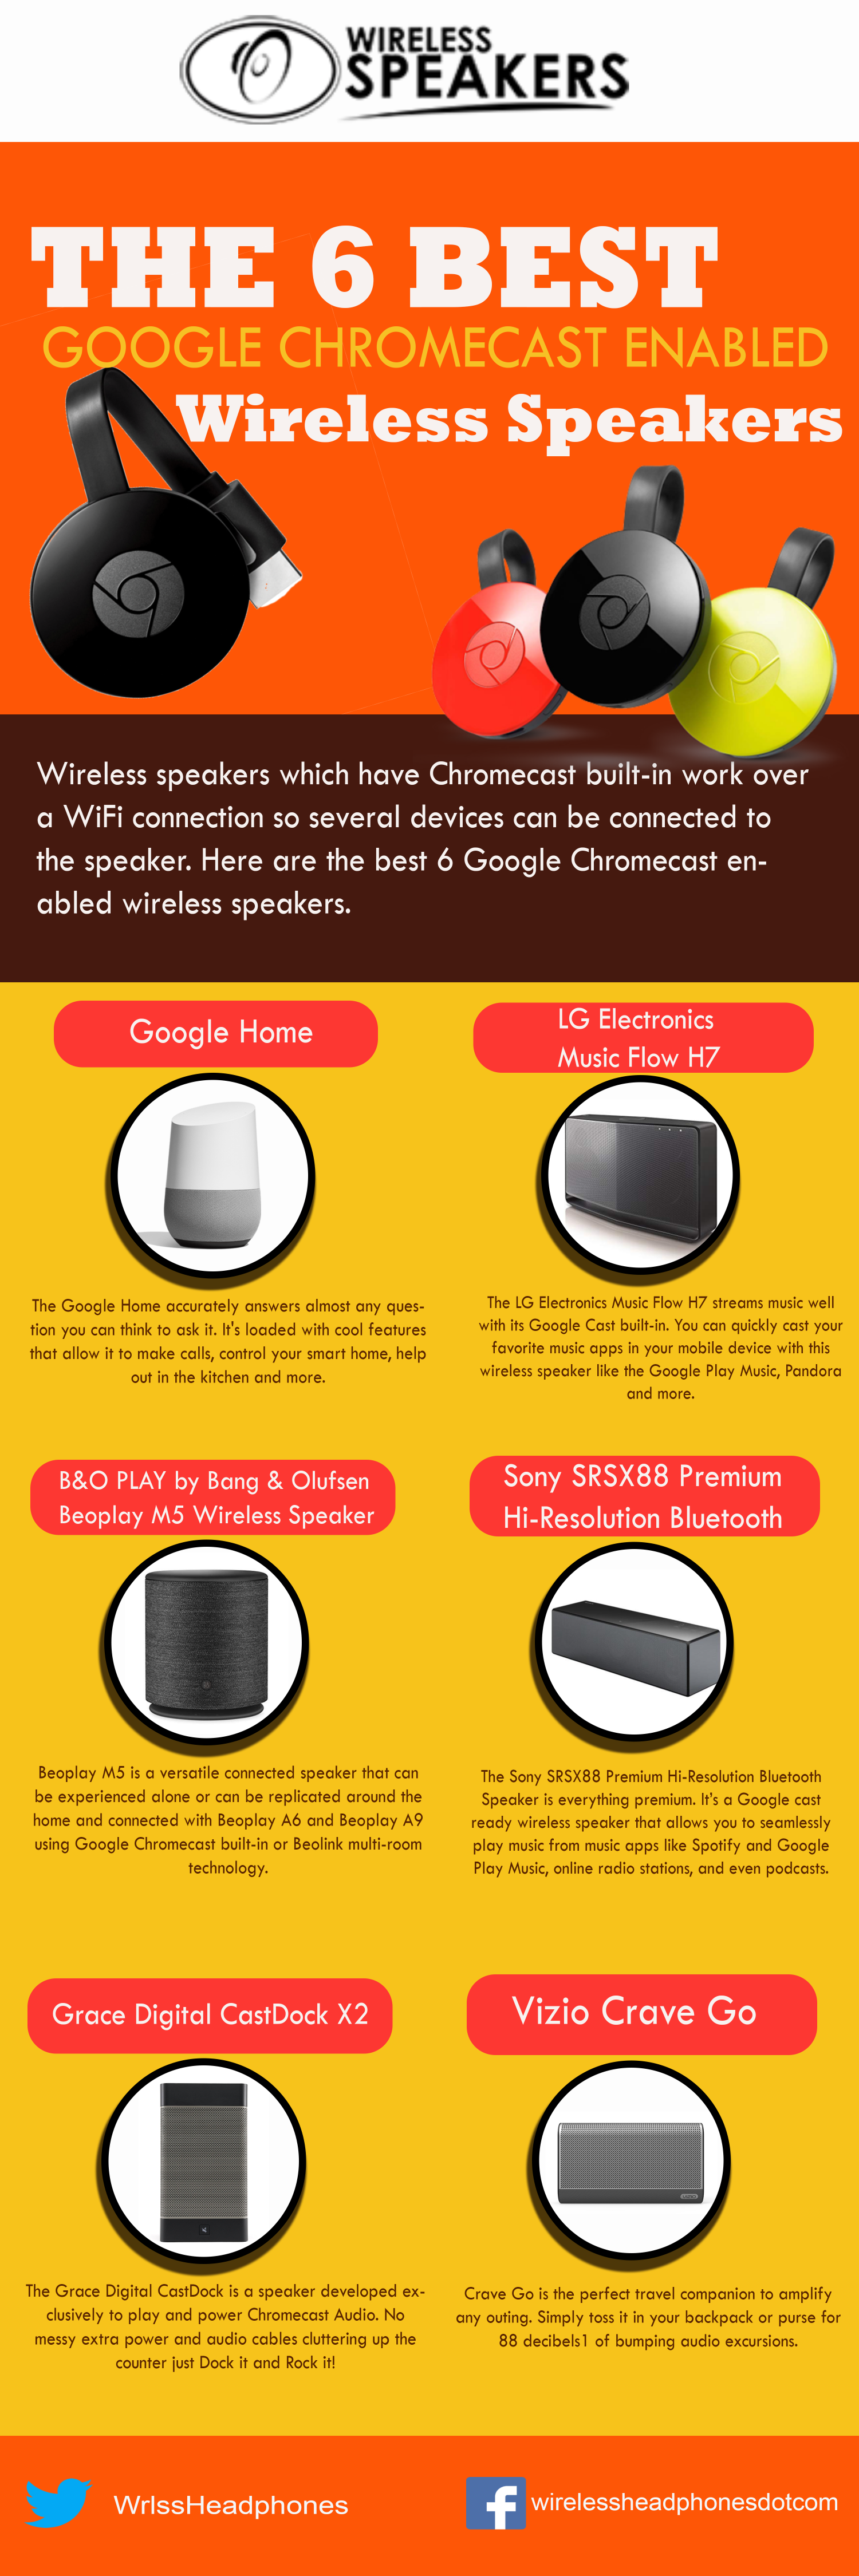 The 6 Best Google Chromecast Enabled Wireless Speakers [ 2018 ] Infographic